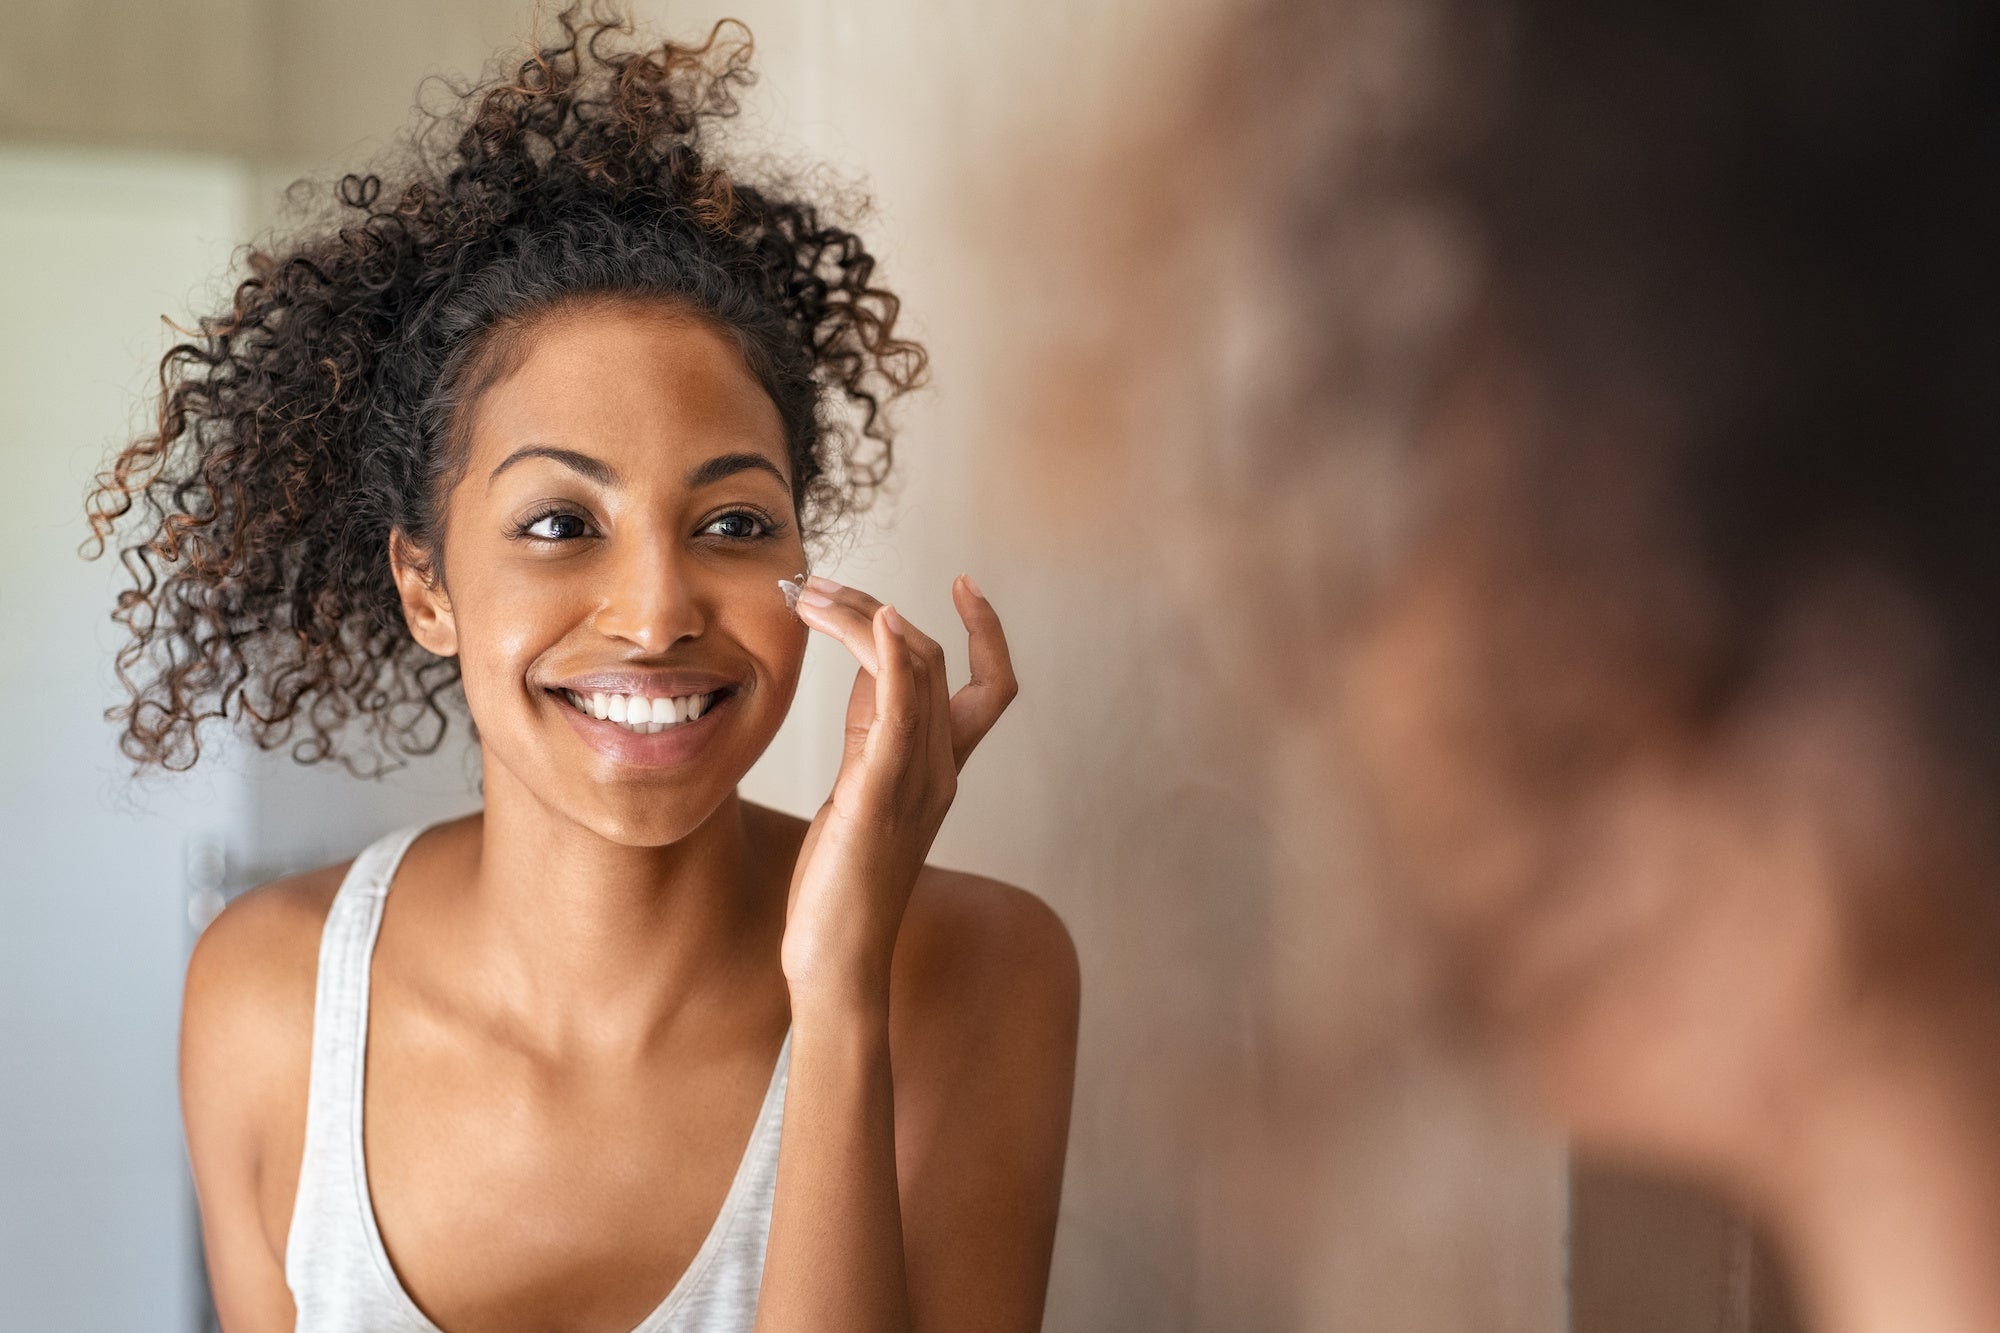 7 Skincare Tips Most Women Don't Know About